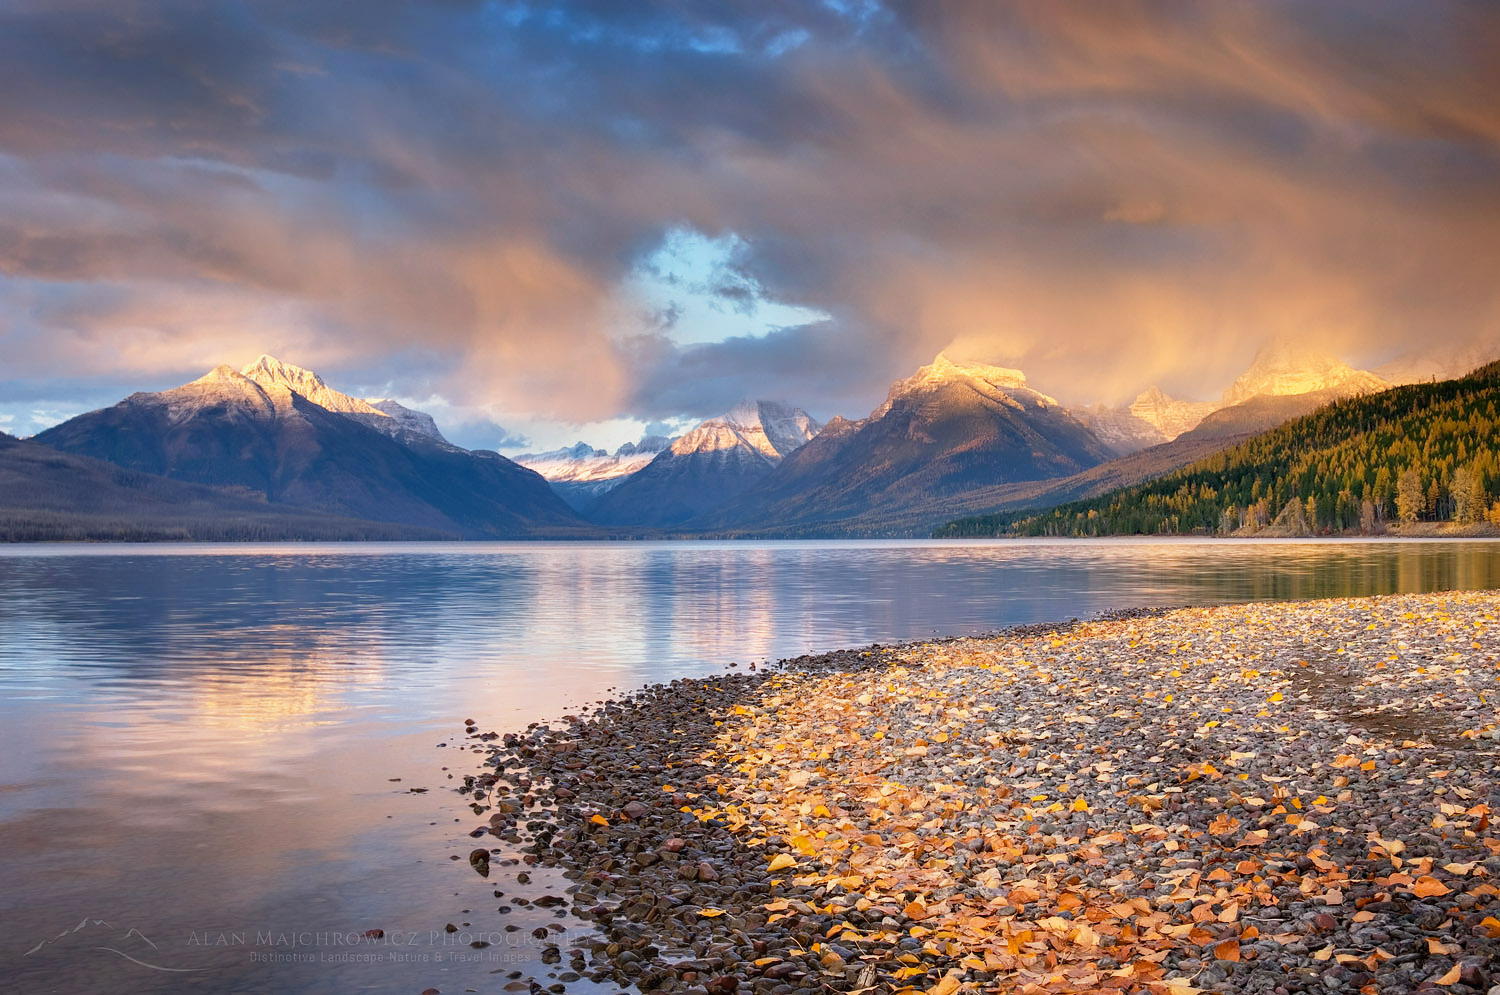 Fallen leaves line the shore of Lake McDonald as a passing storm glows in the evening light, Glacier National Park Montana #22779